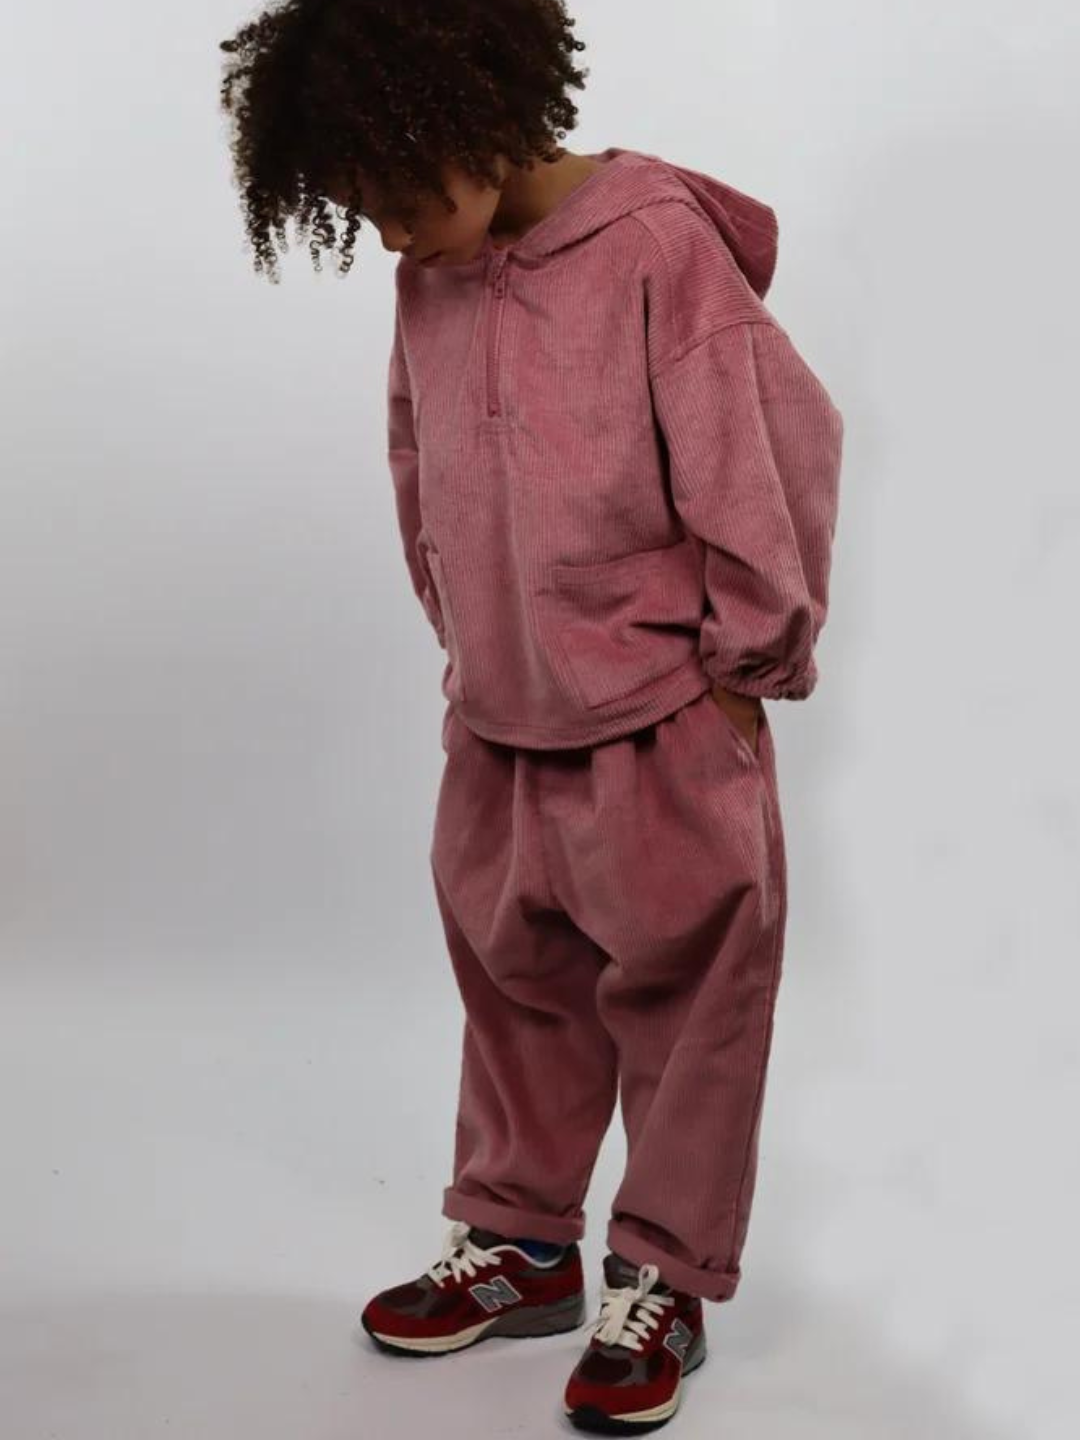 A child wearing matching kids' hooded smock top and pants in dusty pink